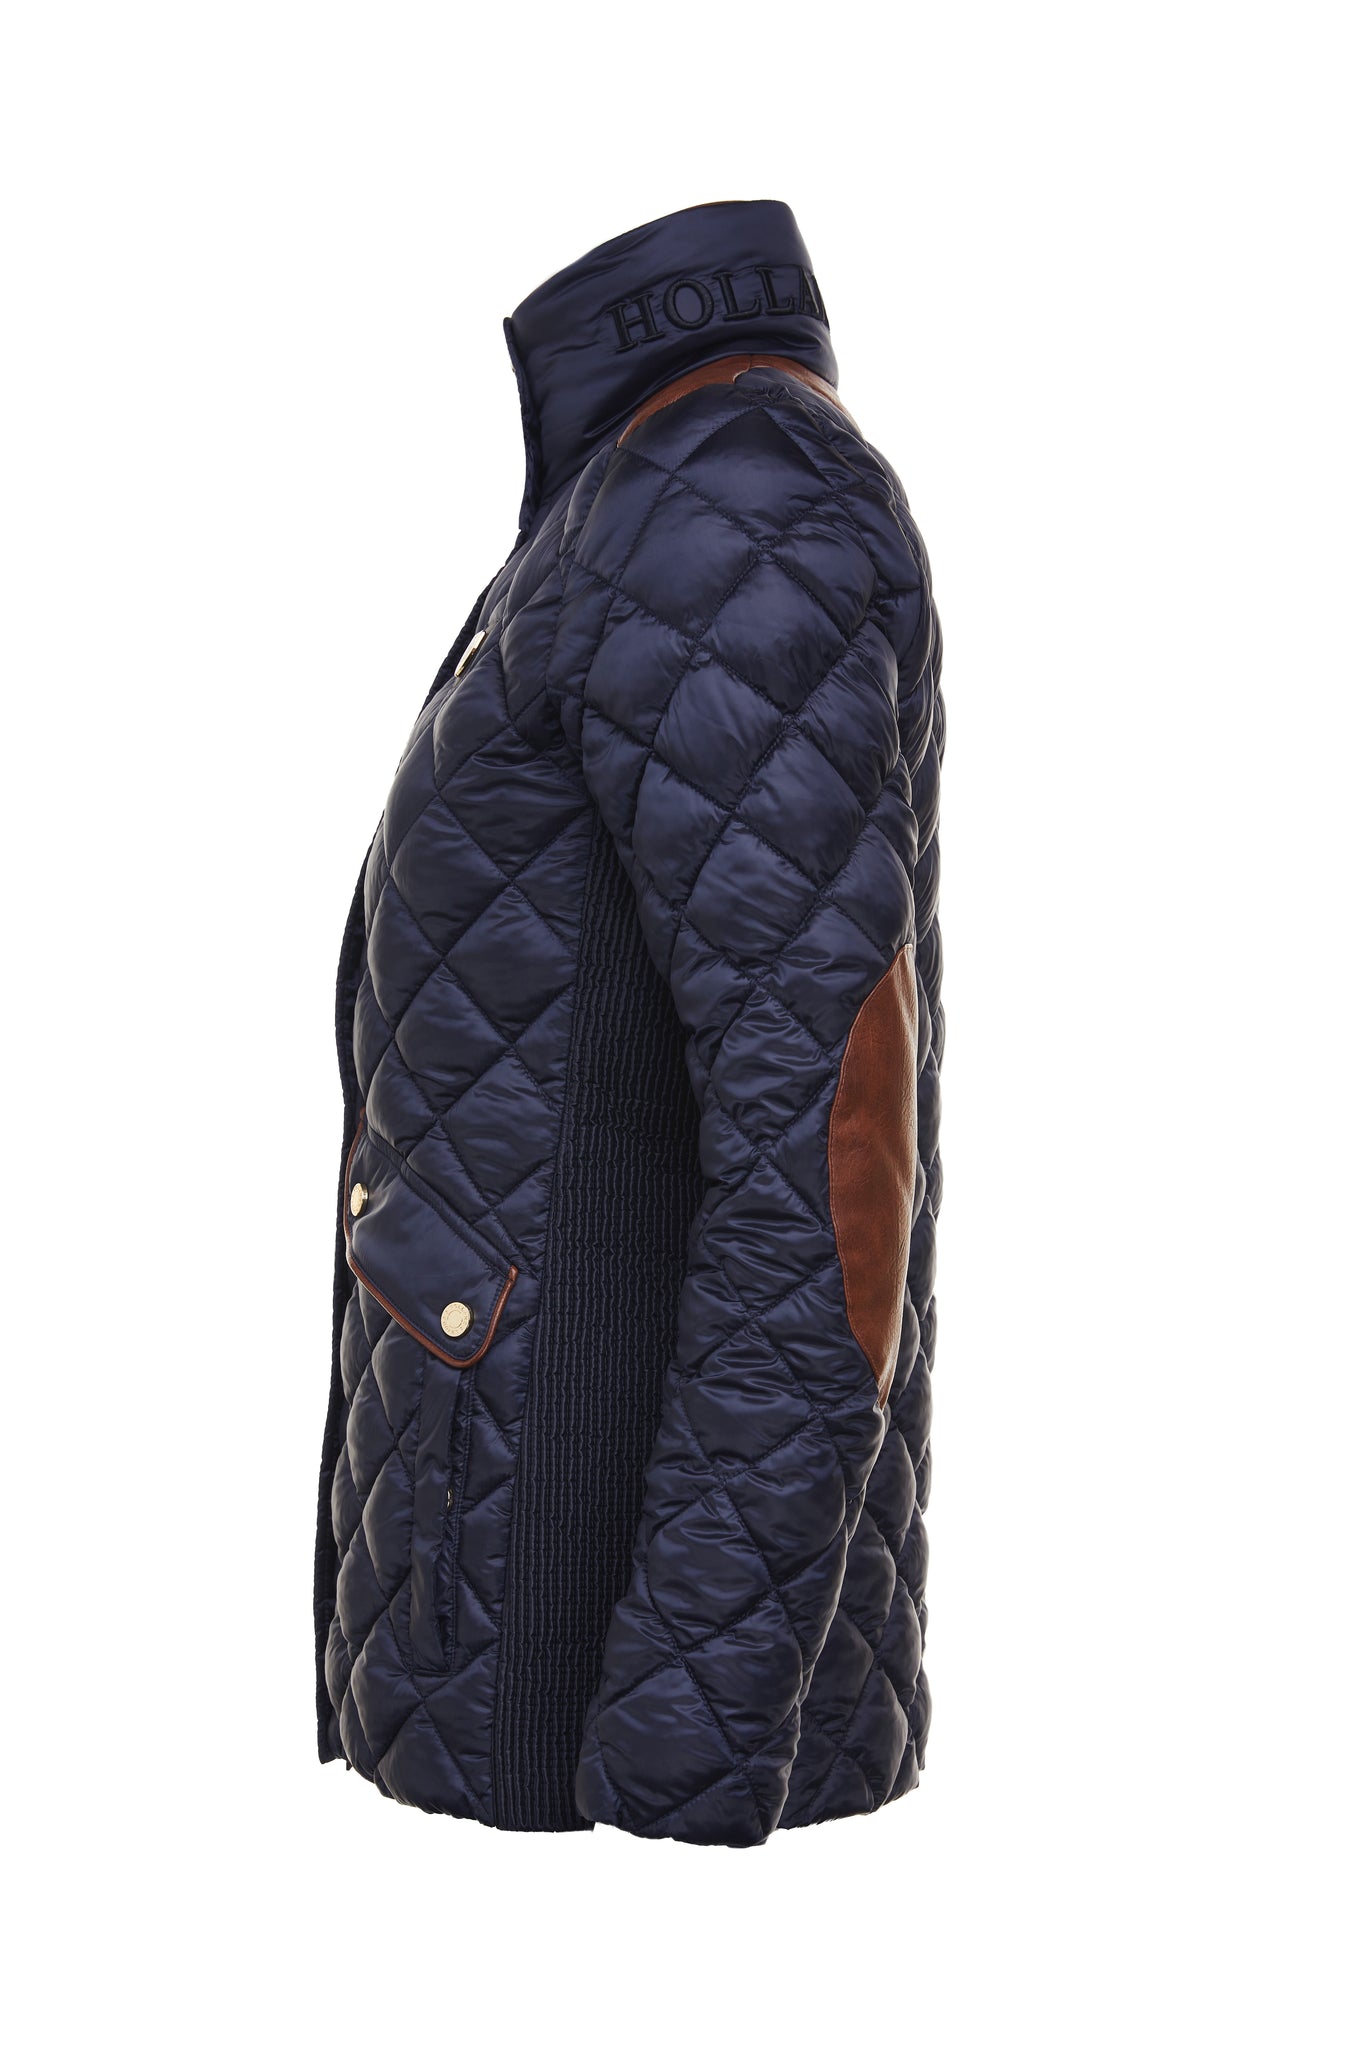 side of womens diamond quilted navy jacket with contrast tan leather elbow and shoulder pads large front pockets and shirred side panels